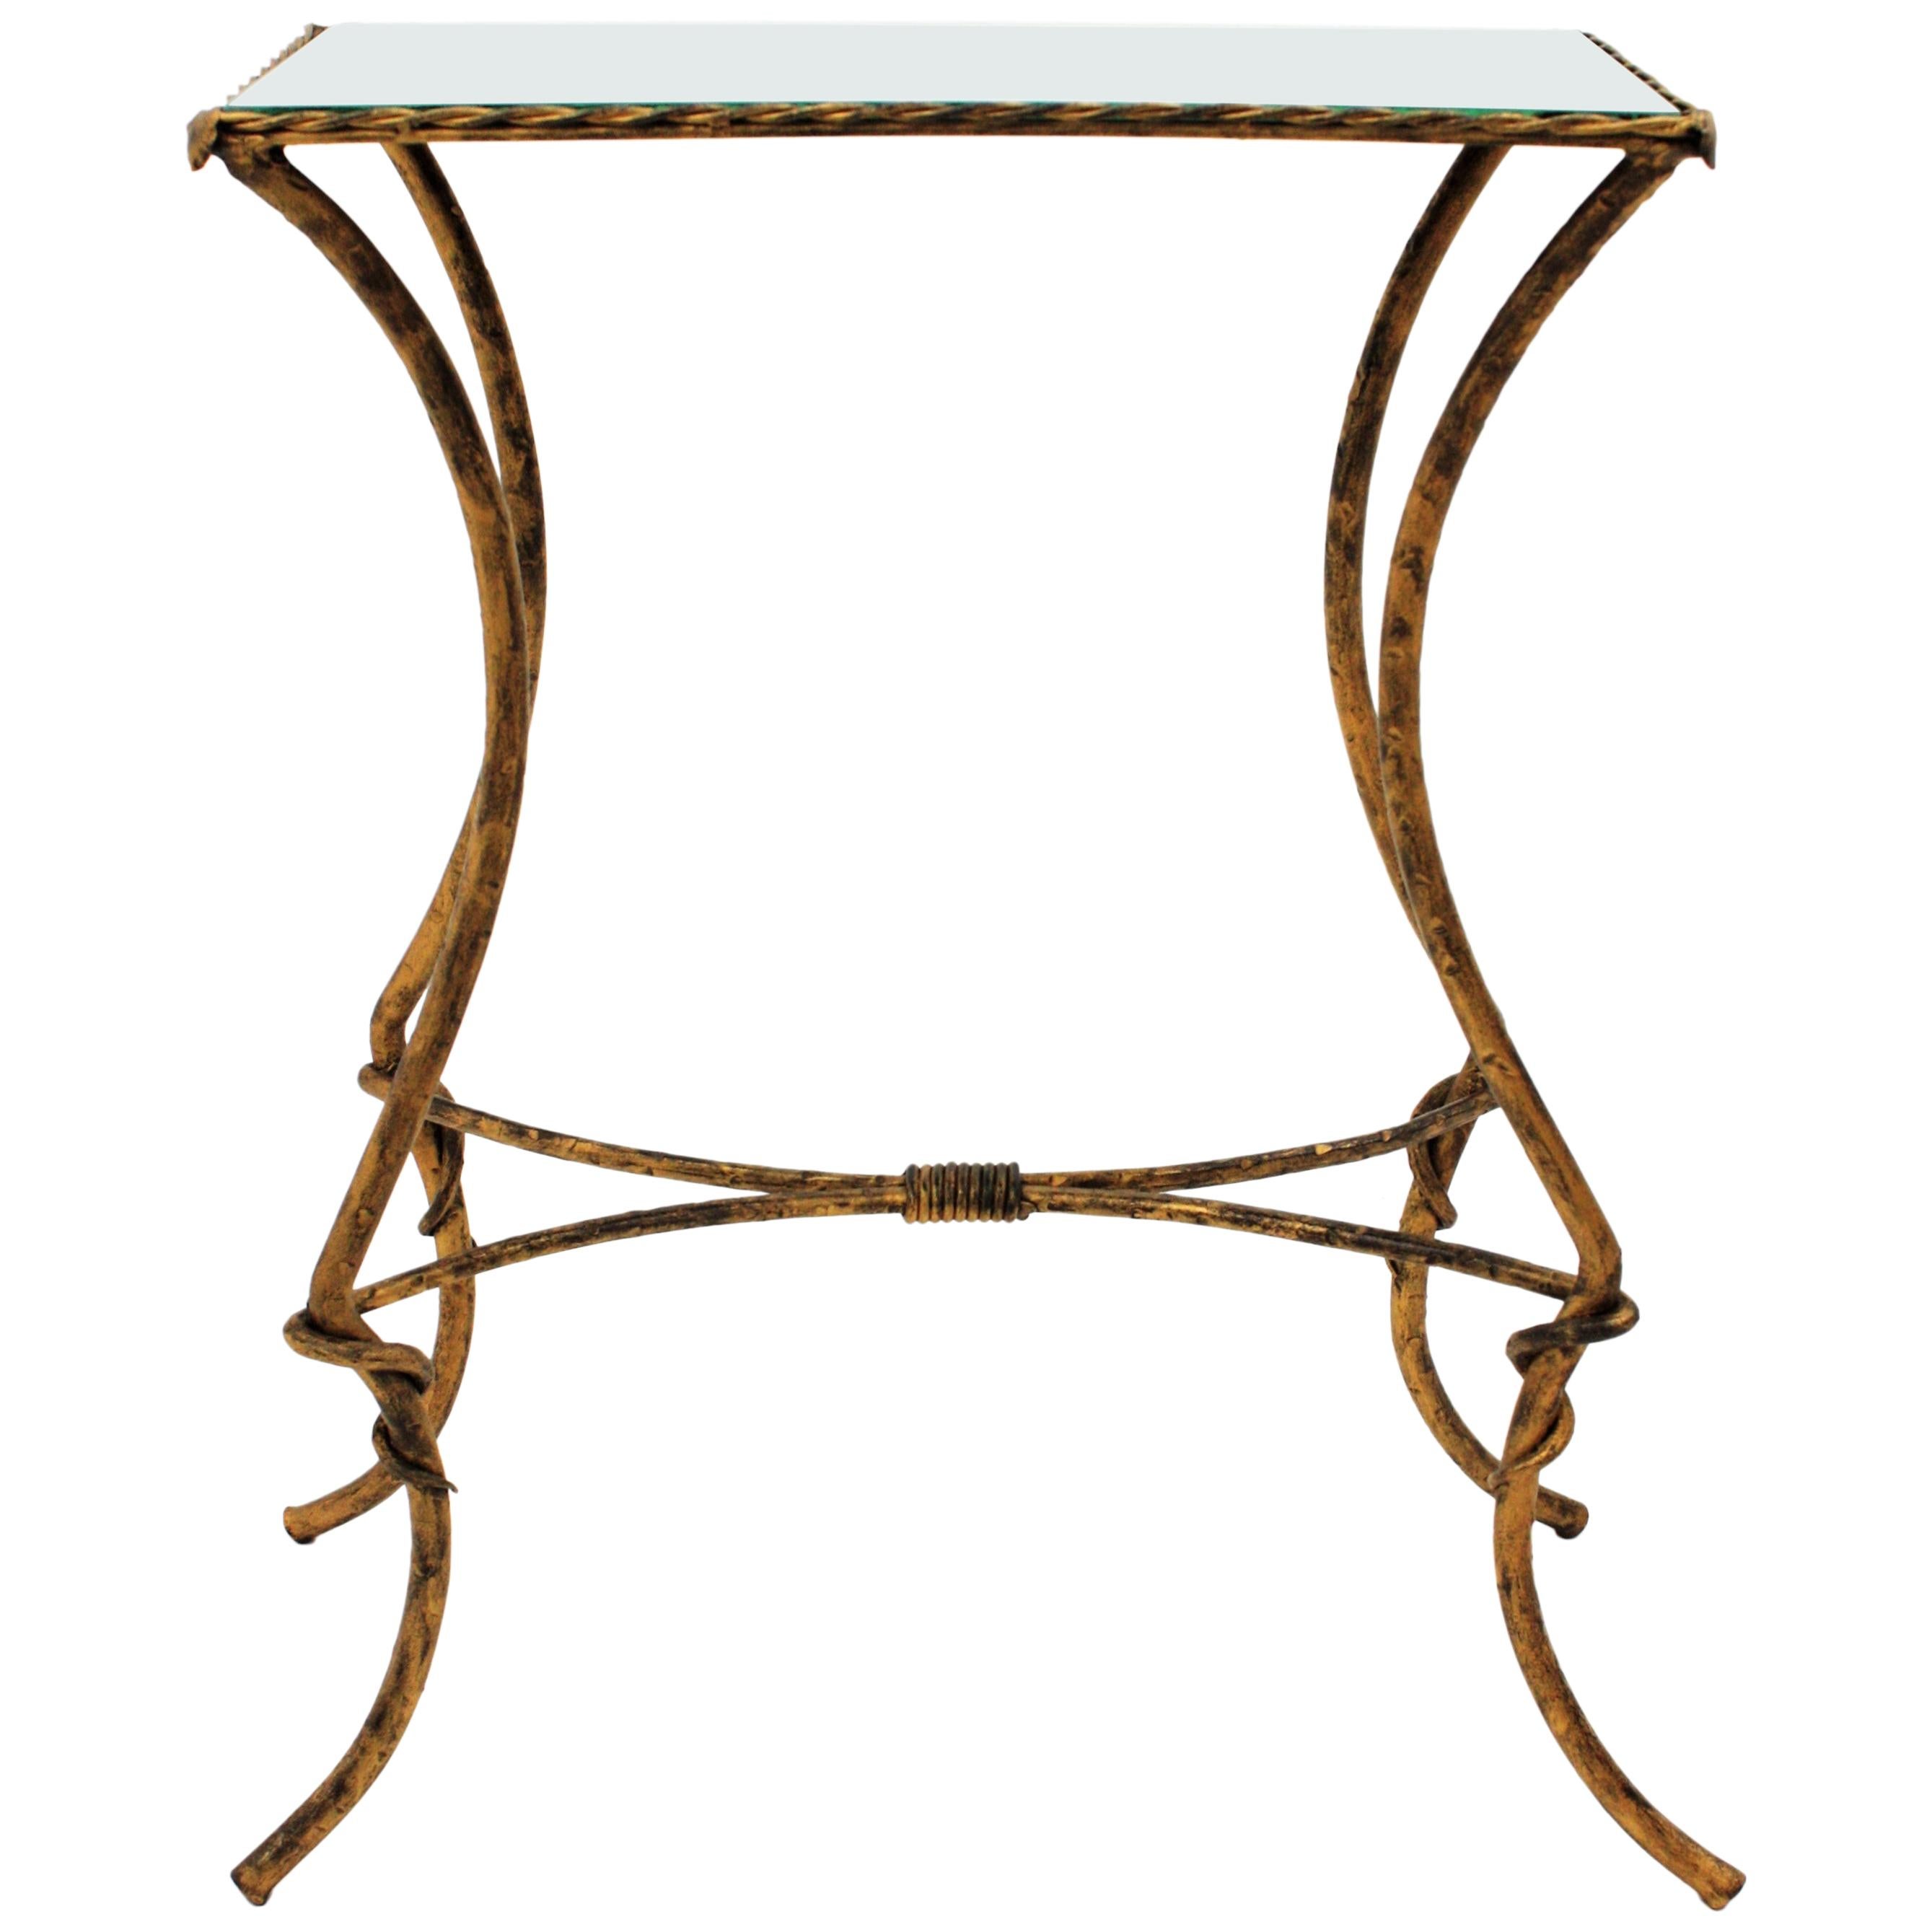 Chic French wrought iron drink table with rectangular mirror top and parcel-gilt finish.
Beautifully designed at the Hollywood Regency period inspired by Maison Baguès pieces.
It has a mirror glass rectangular top surrounded by a twisted iron